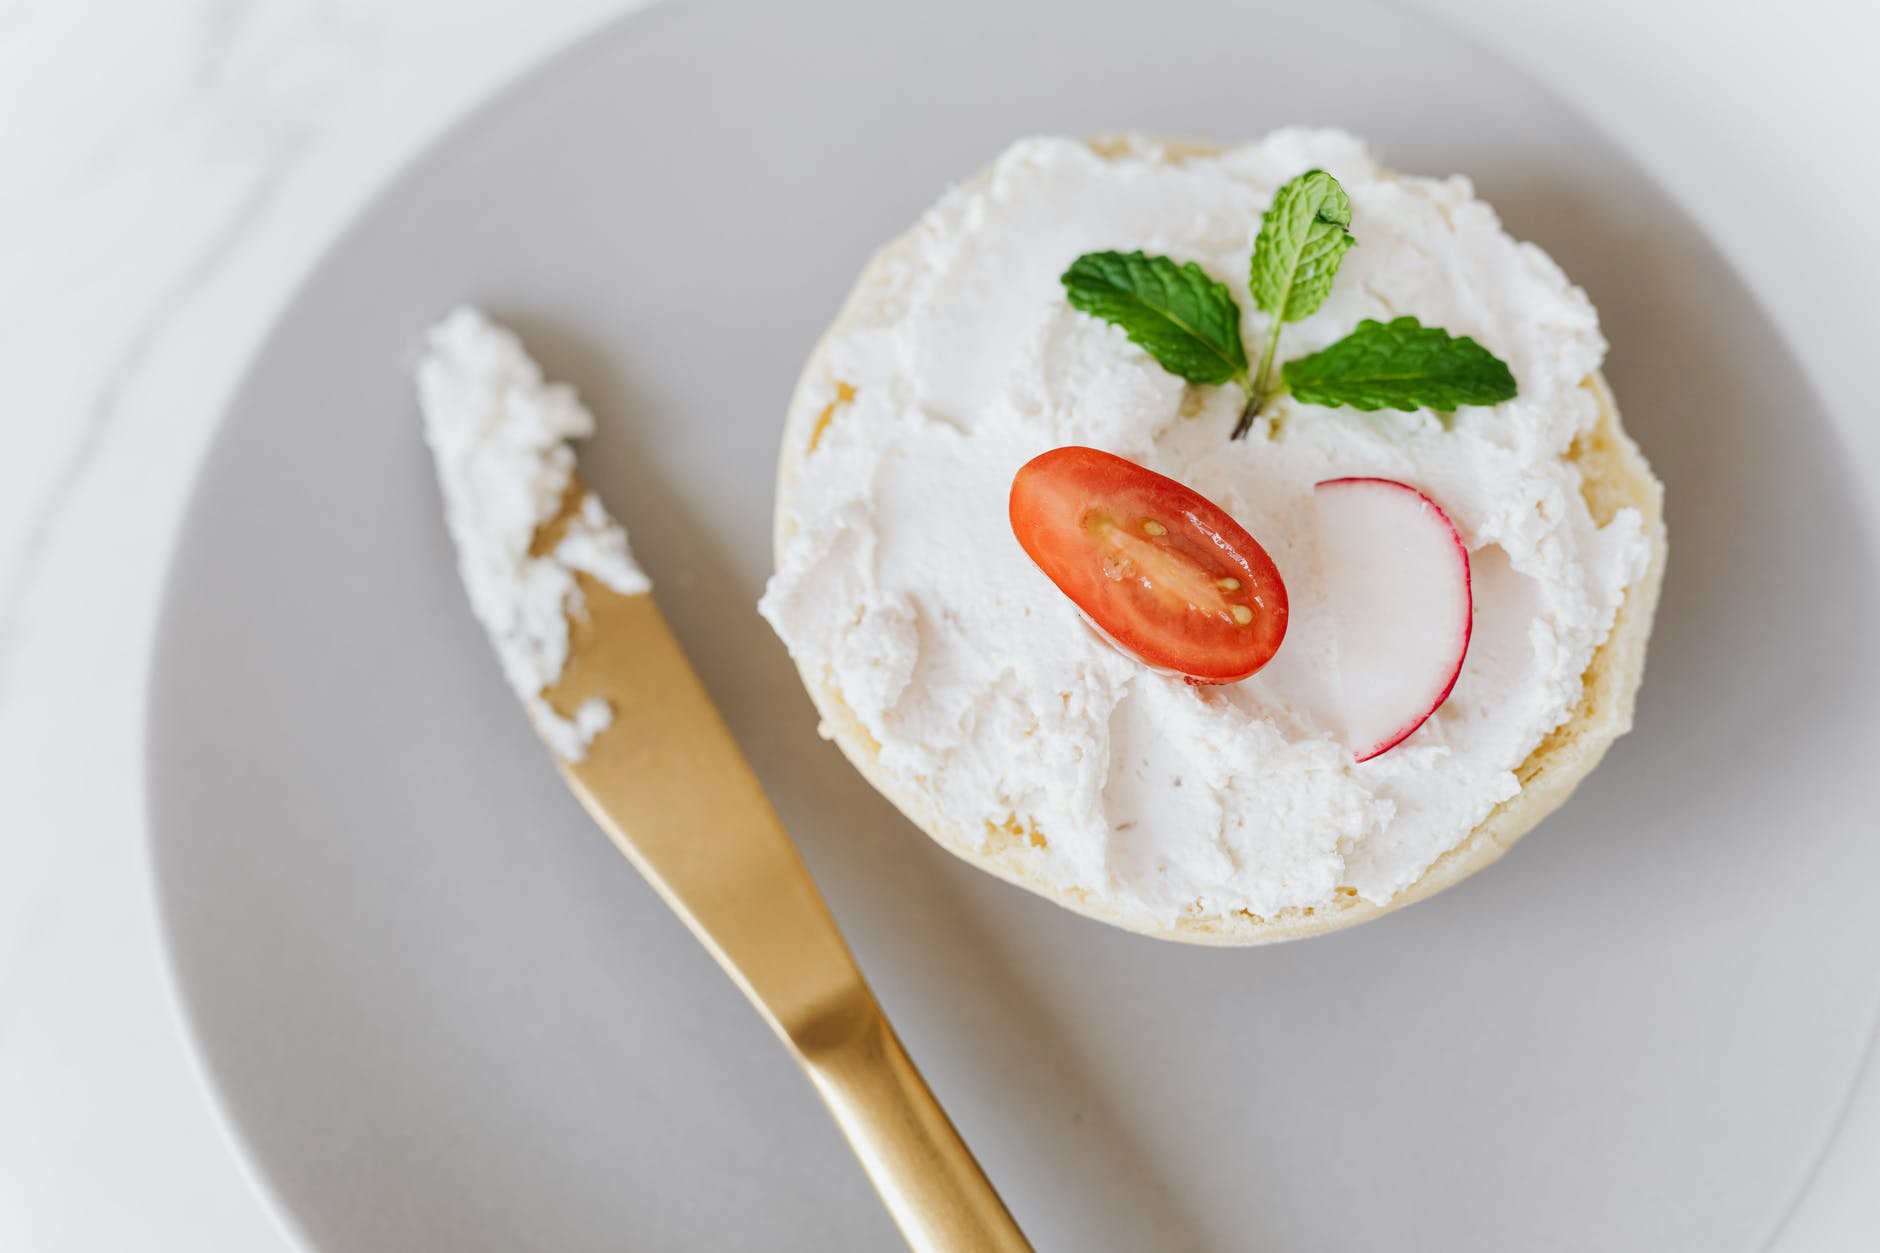 soft cottage cheese spread on bun with vegetable